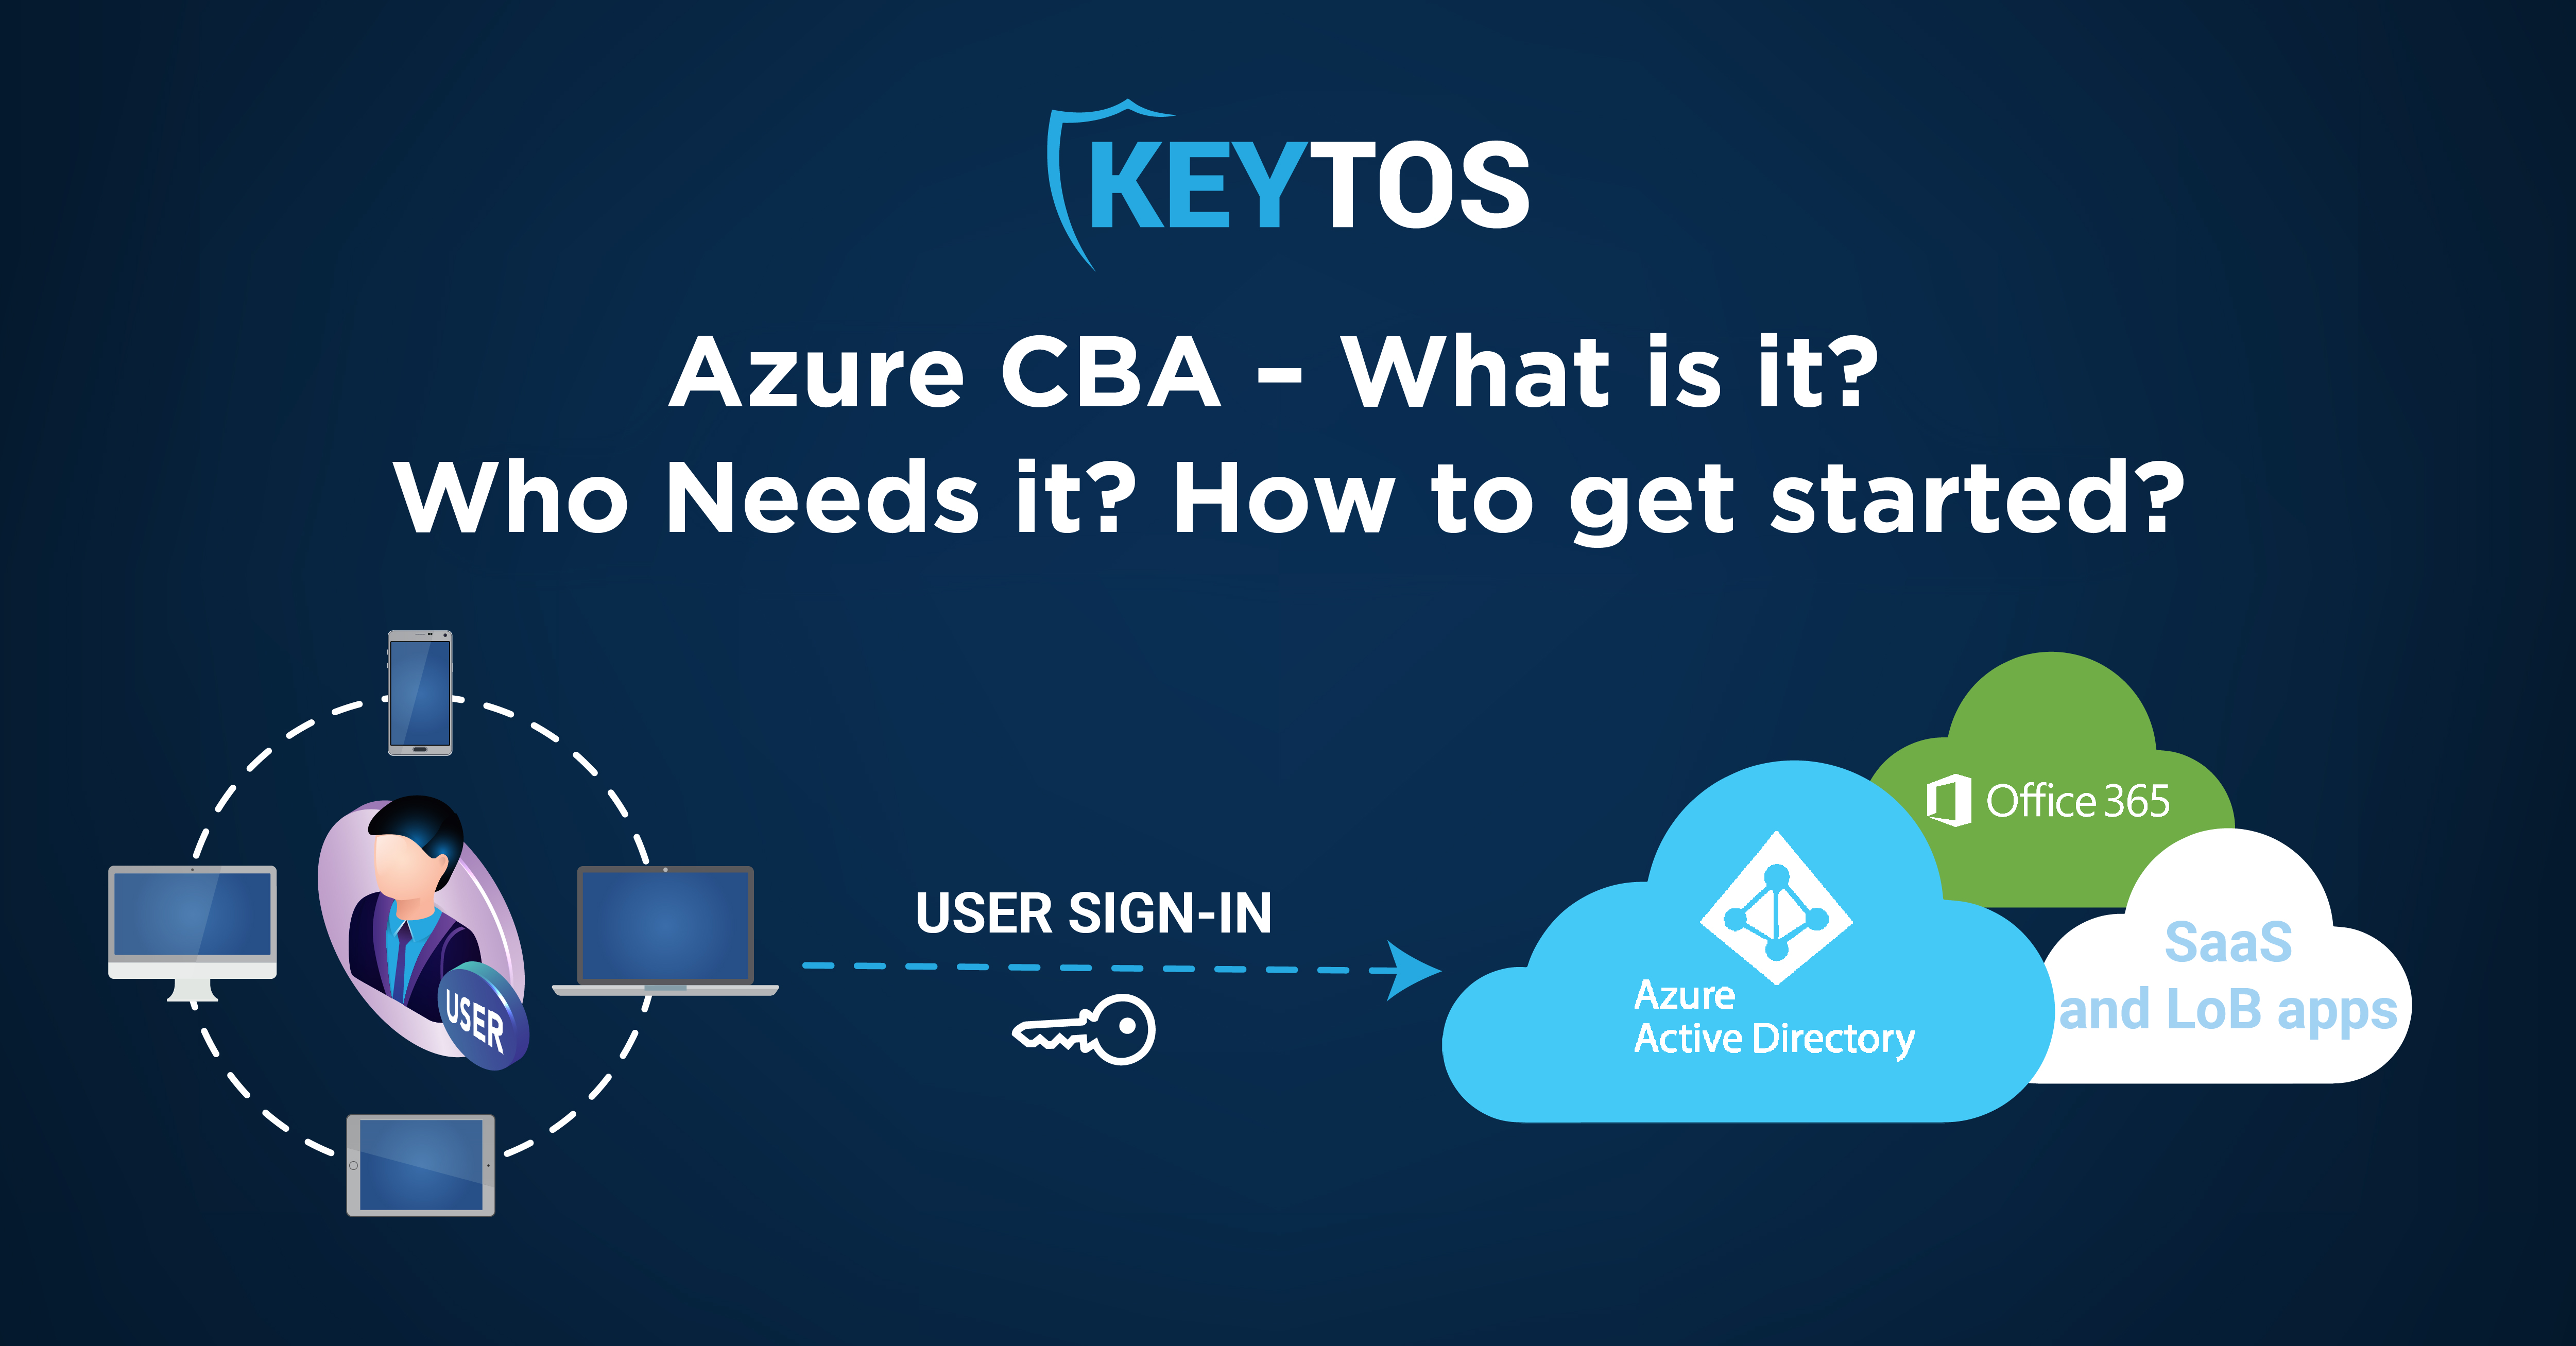 How to Get Started With Azure CBA